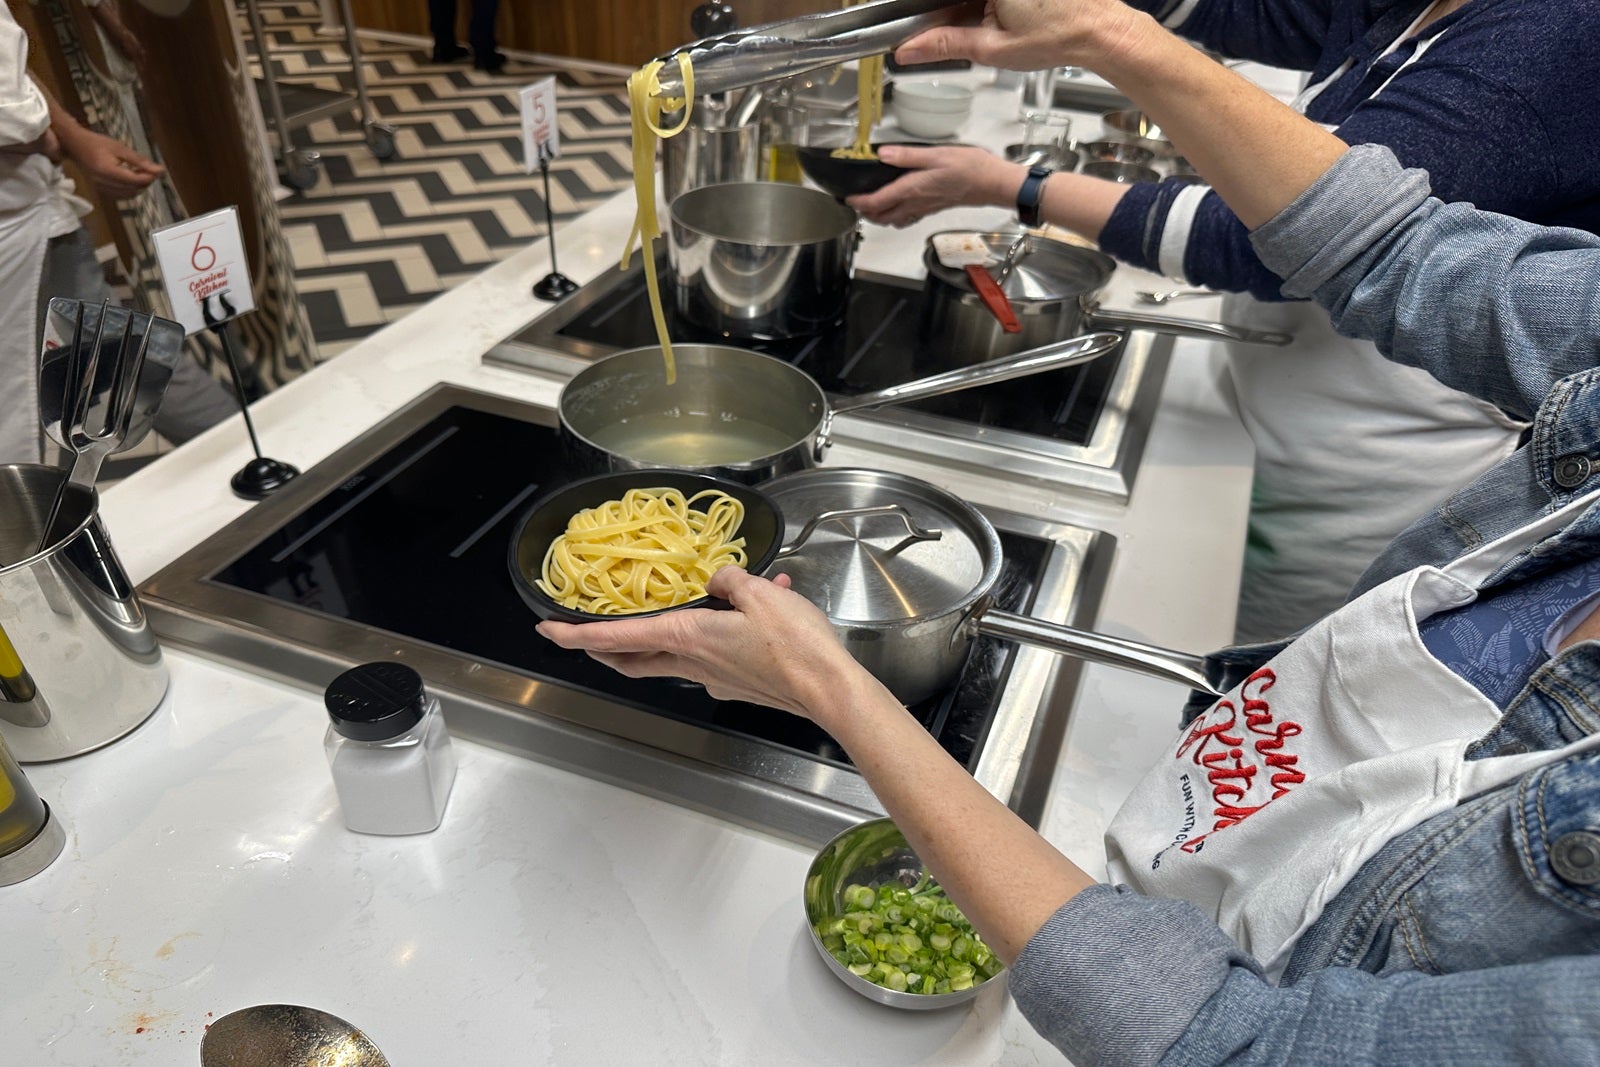 A pair of hands preparing a pasta dish over a cooktop